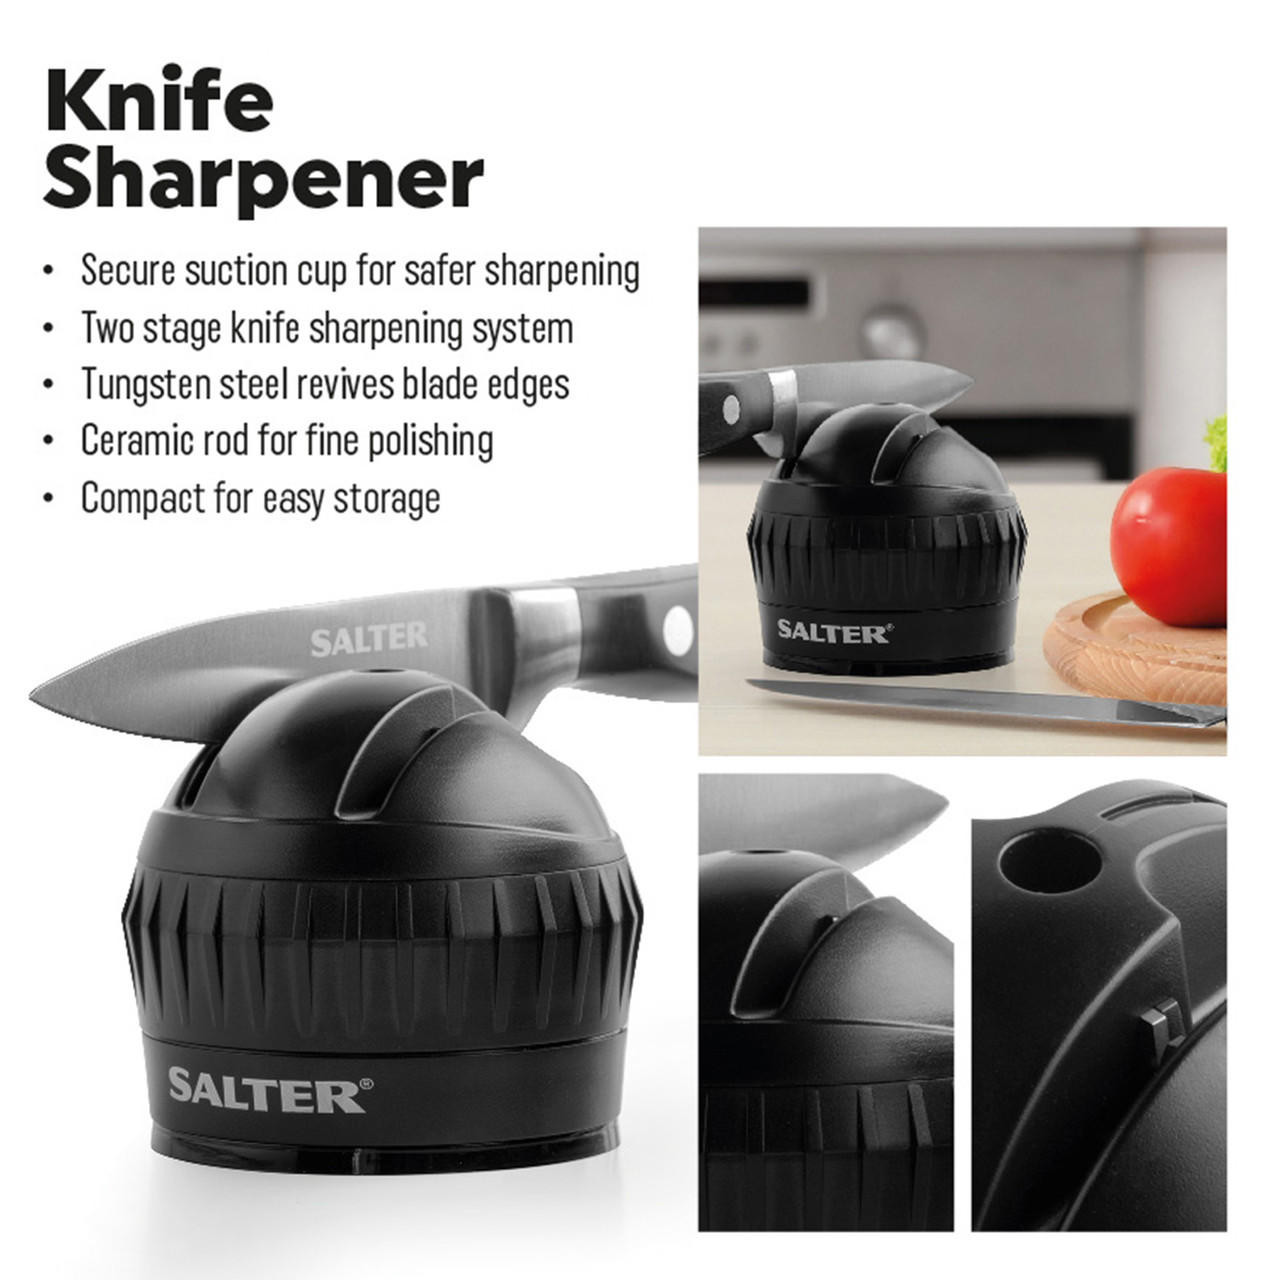 https://cdn11.bigcommerce.com/s-5vfc75n1yv/images/stencil/1280x1280/products/2546/18217/manual-knife-sharpener-with-secure-suction-cup-salter-bw11671b-5054061438420__03418.1698134037.jpg?c=1